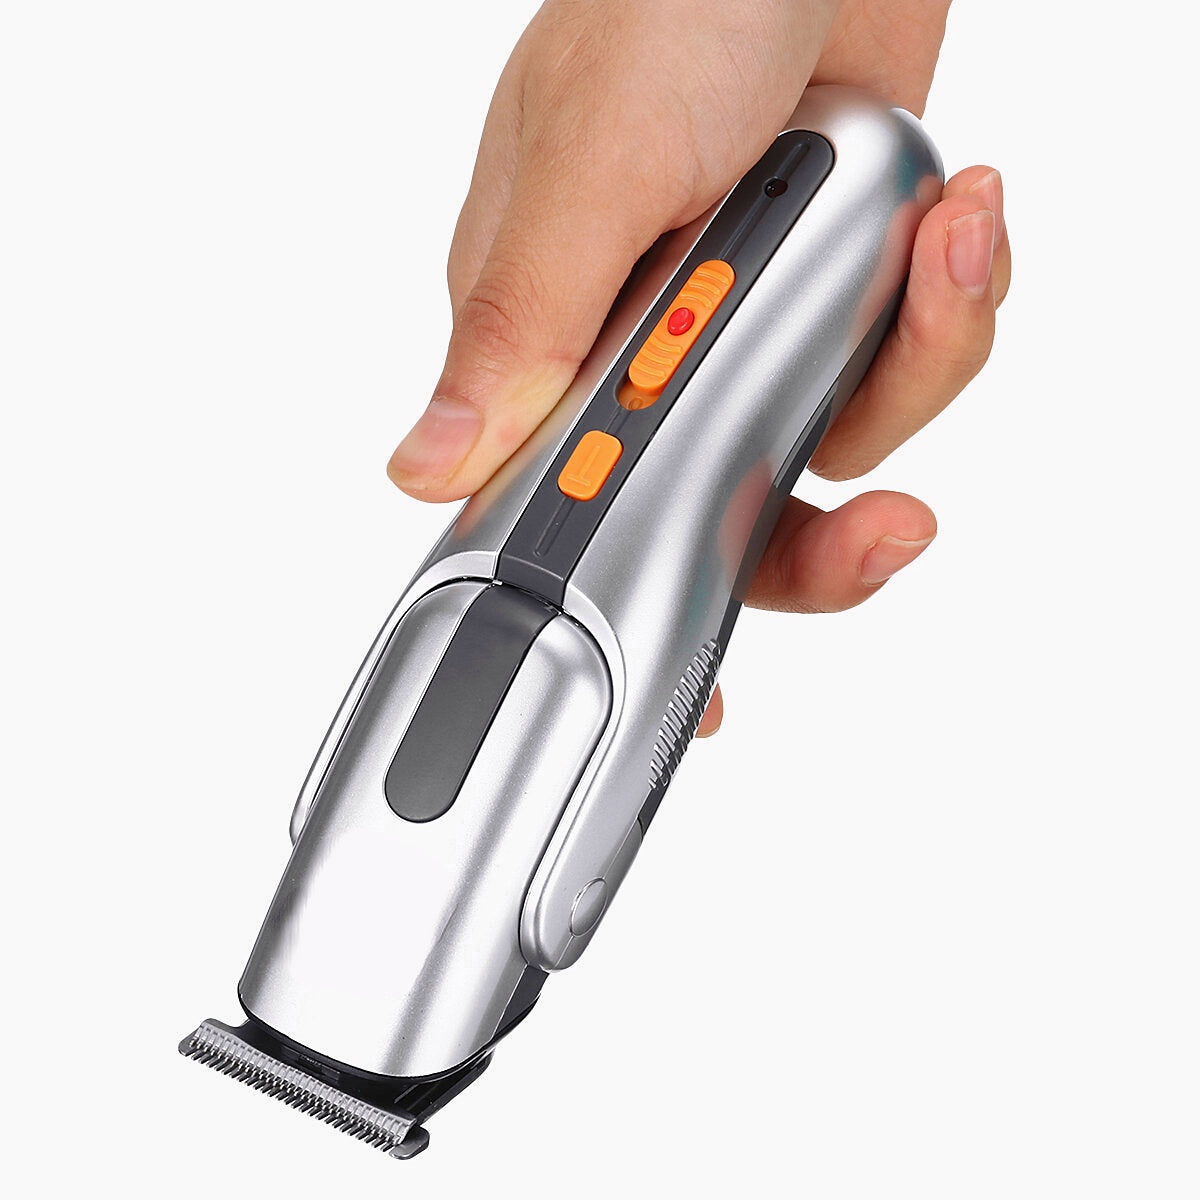 8 in 1 Electric Hair Clipper IPX7 Waterproof Rechargeable Hair Trimmer Shaver With 3 Limit Comb